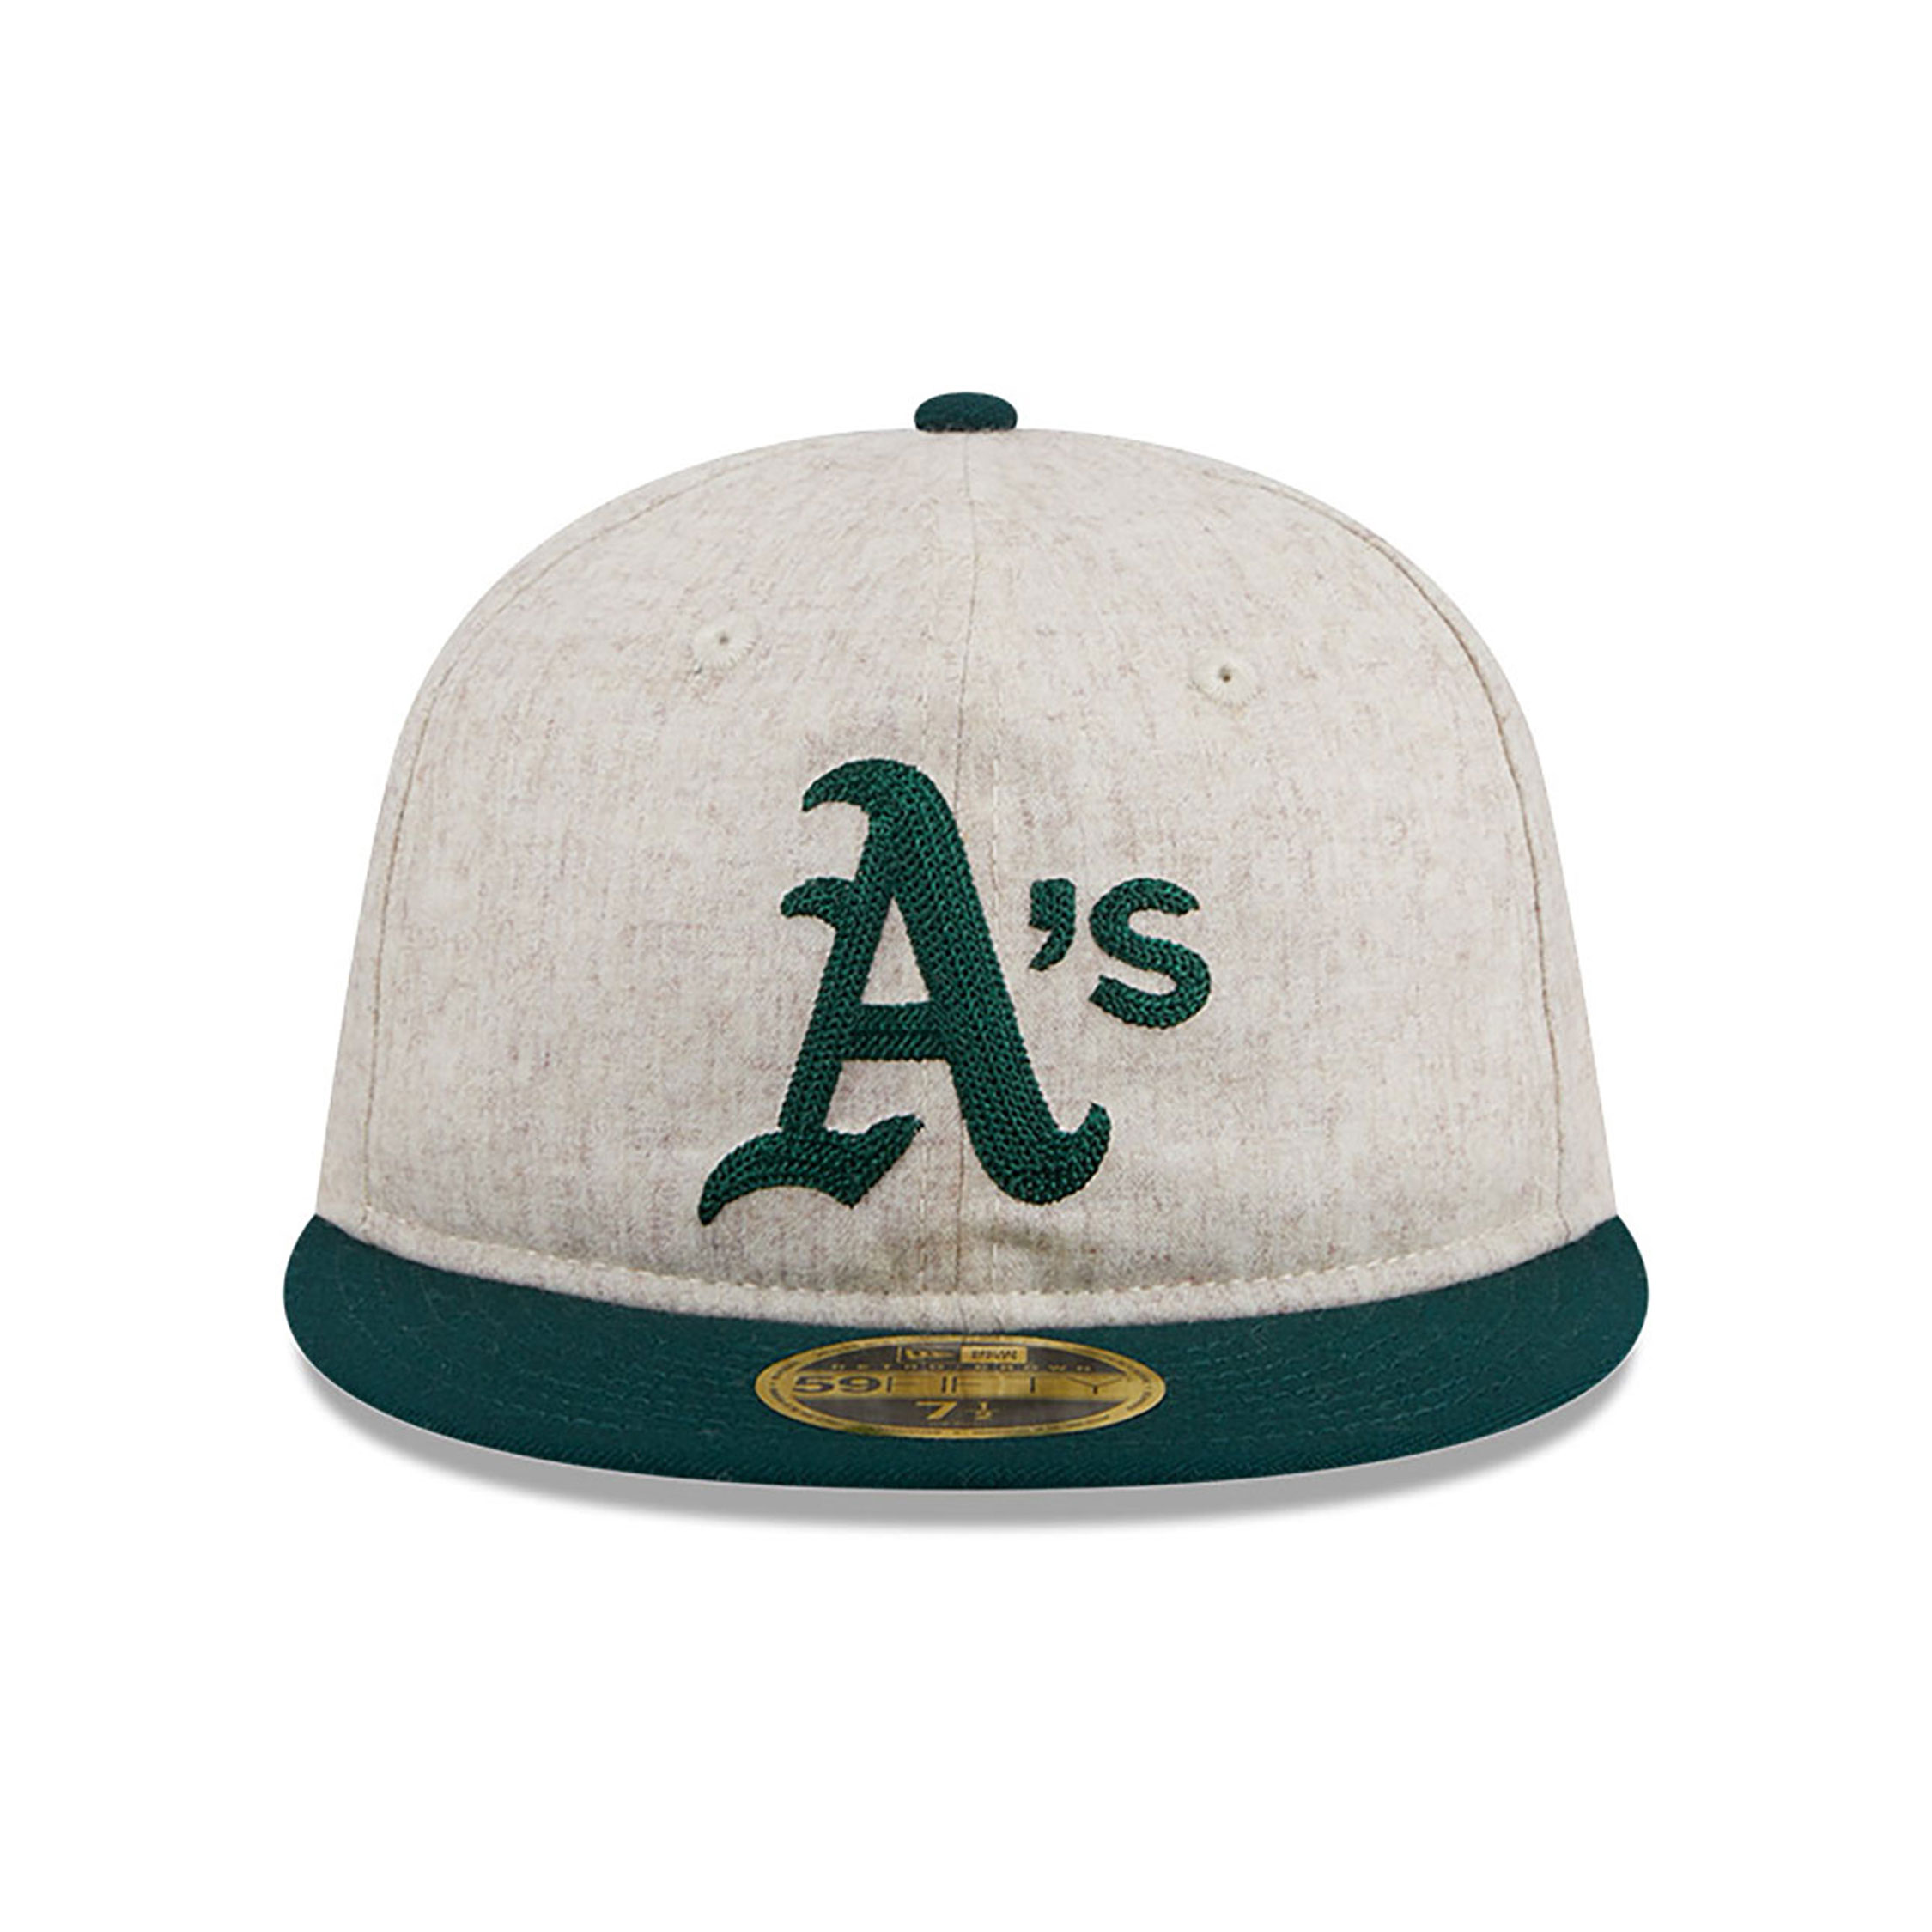 Oakland Athletics Melton Wool Light Beige Retro Crown 59FIFTY Fitted Cap